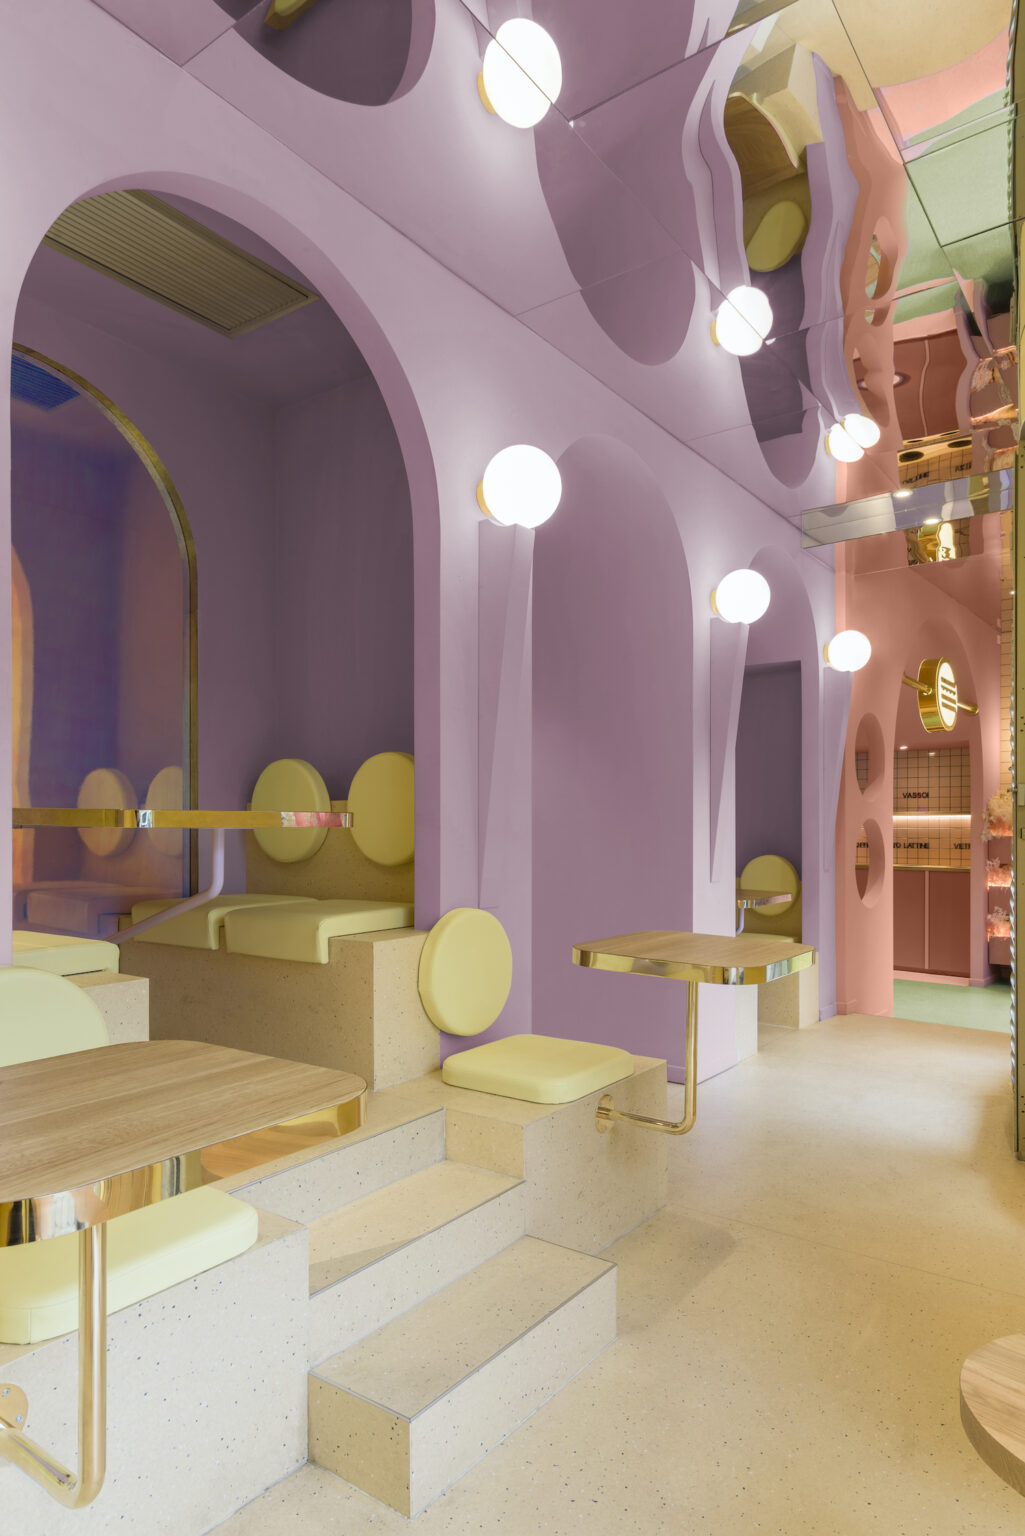 The dressing room is represented by a purple room with arches to place visitors in their âprivate spaceâ